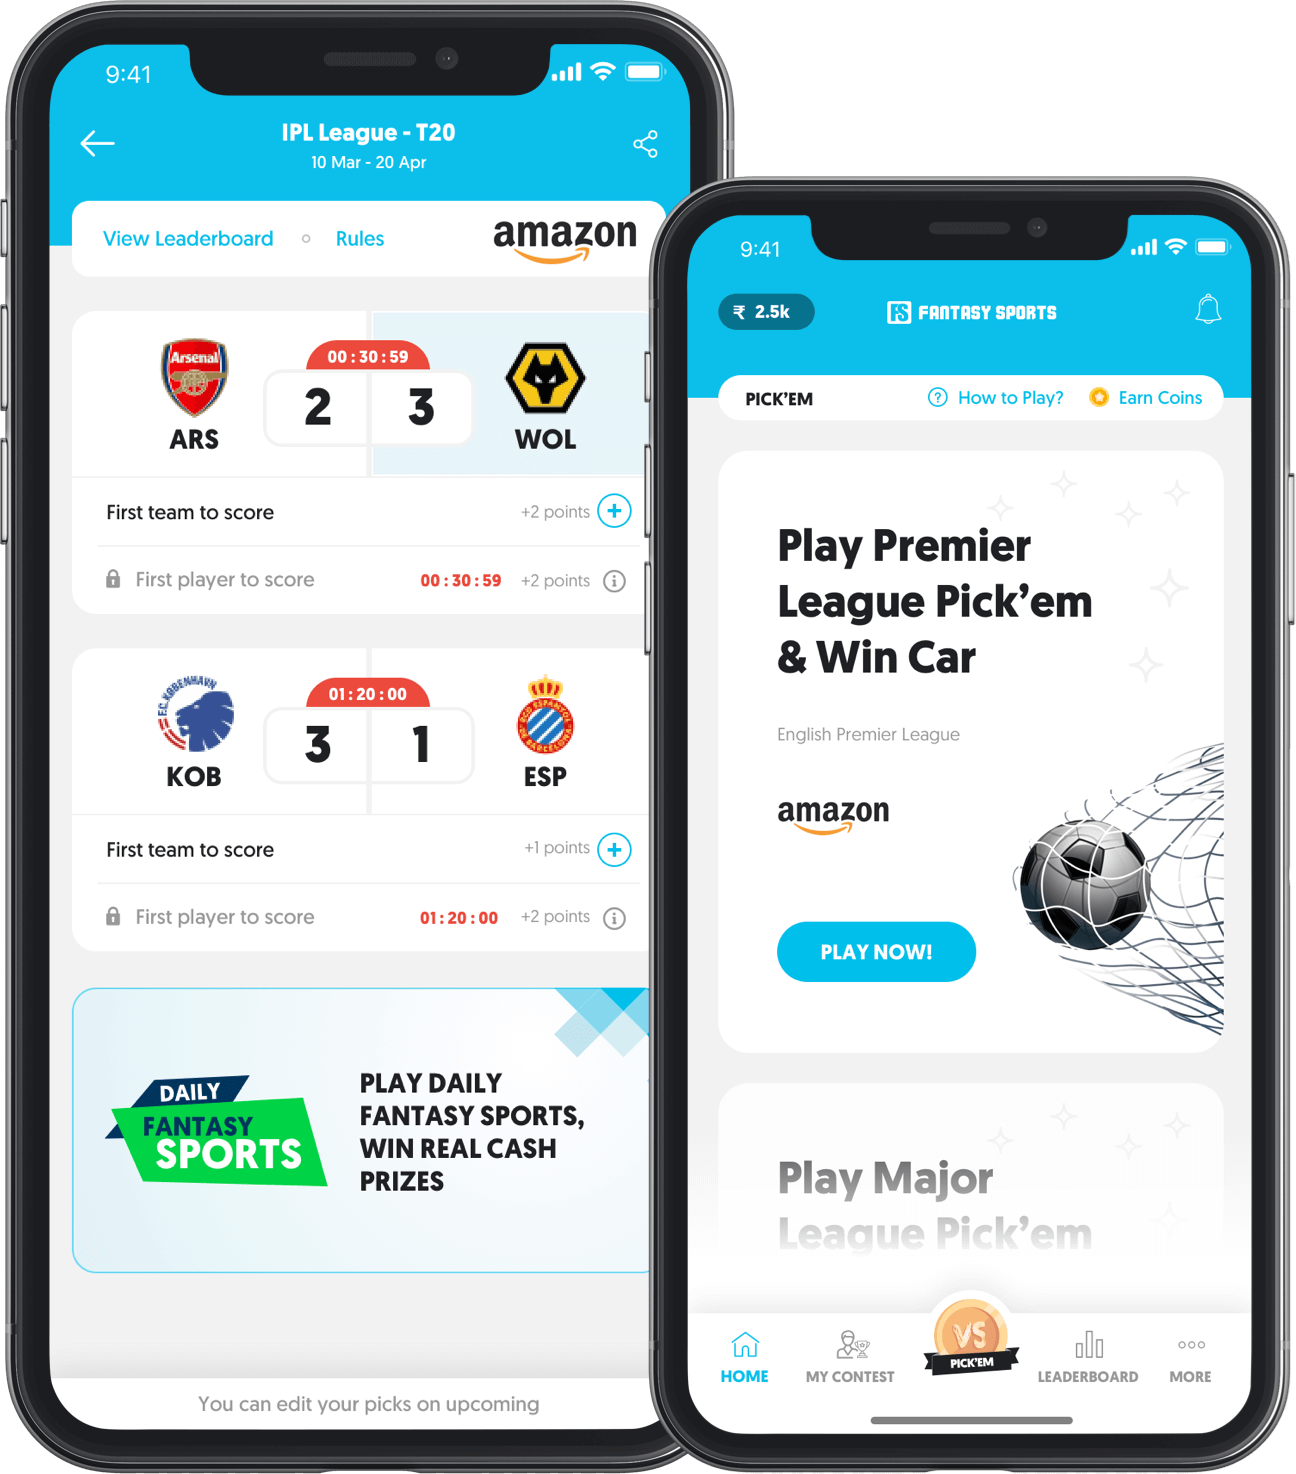 A fantasy sports variant which is easy to play the game a user simply has to predict the winner of the game to earn coins developed by Vinfotech